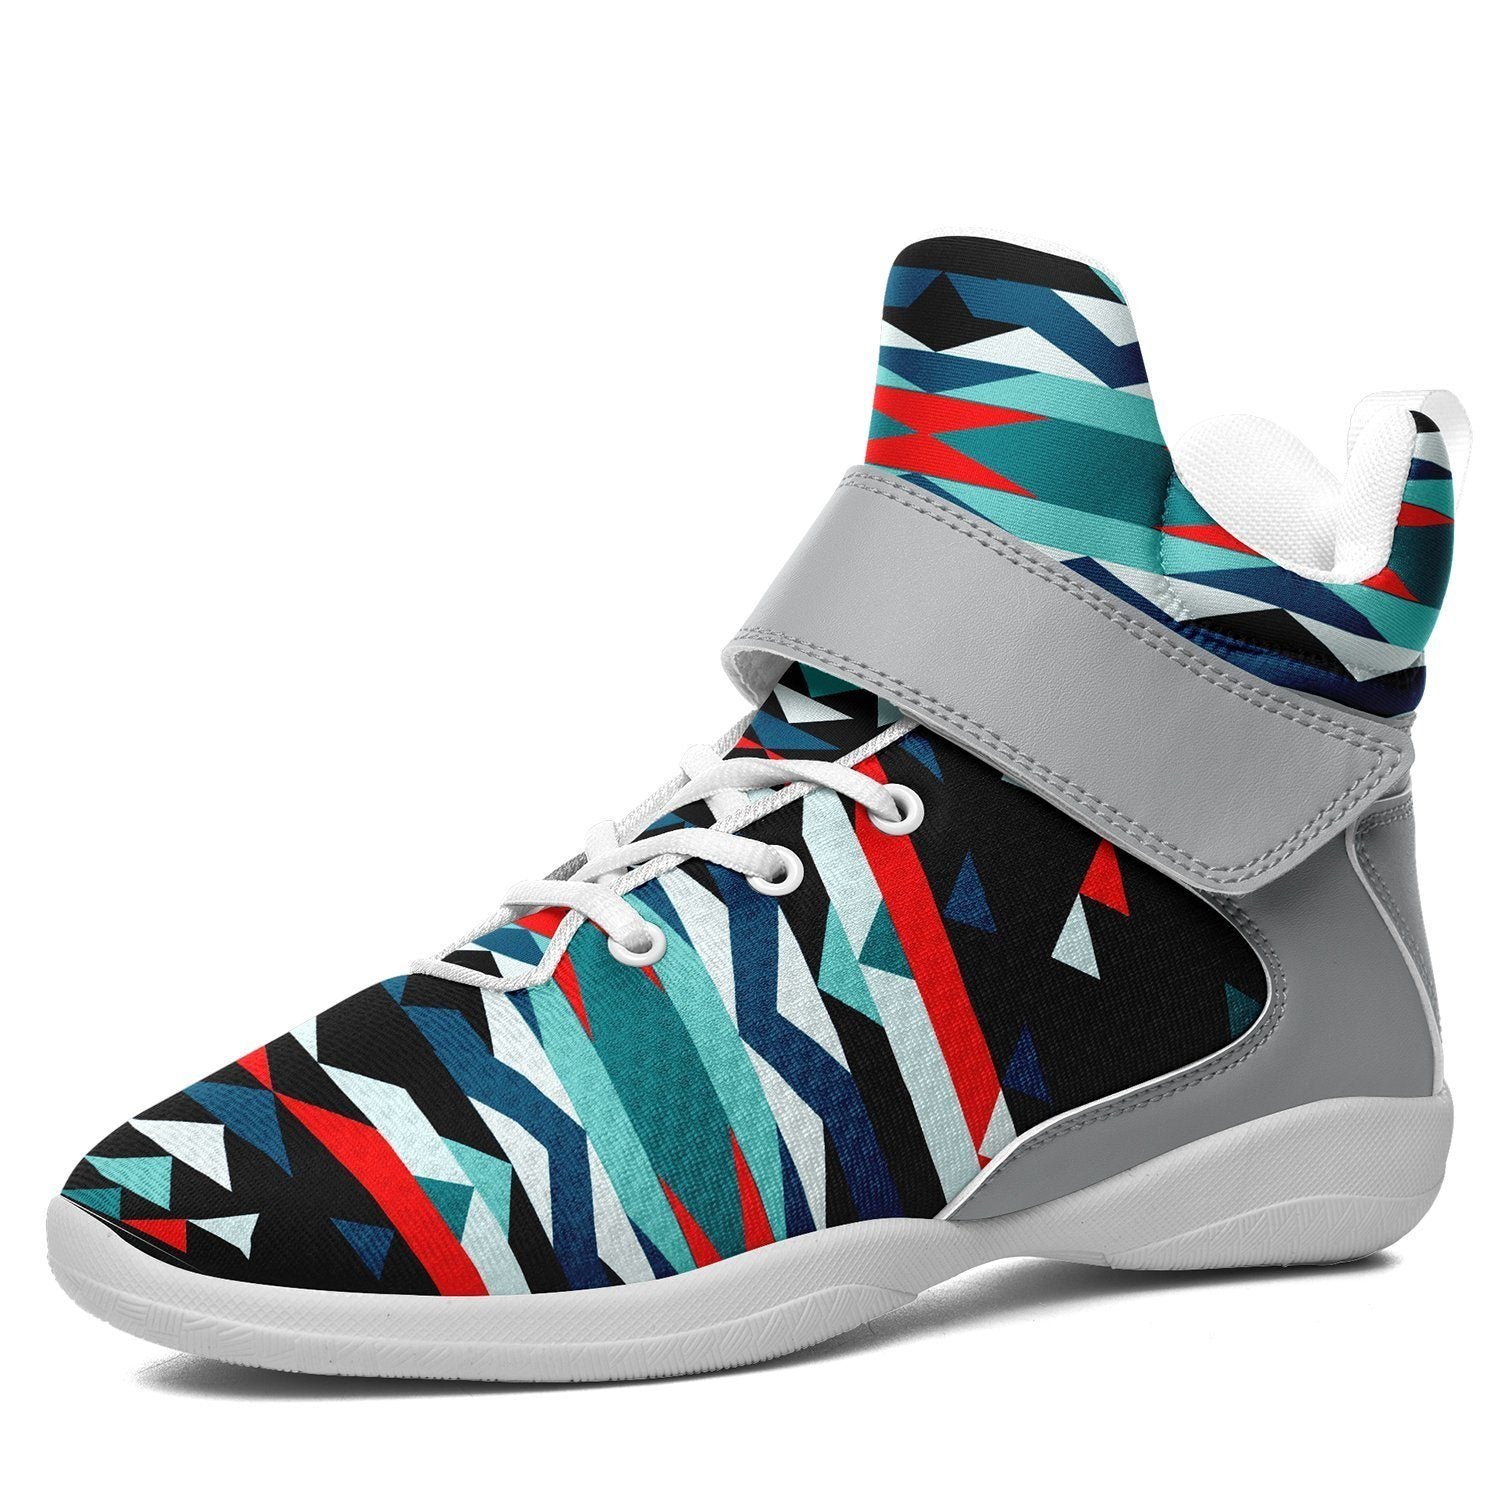 Visions of Peaceful Nights Ipottaa Basketball / Sport High Top Shoes - White Sole 49 Dzine US Men 7 / EUR 40 White Sole with Gray Strap 